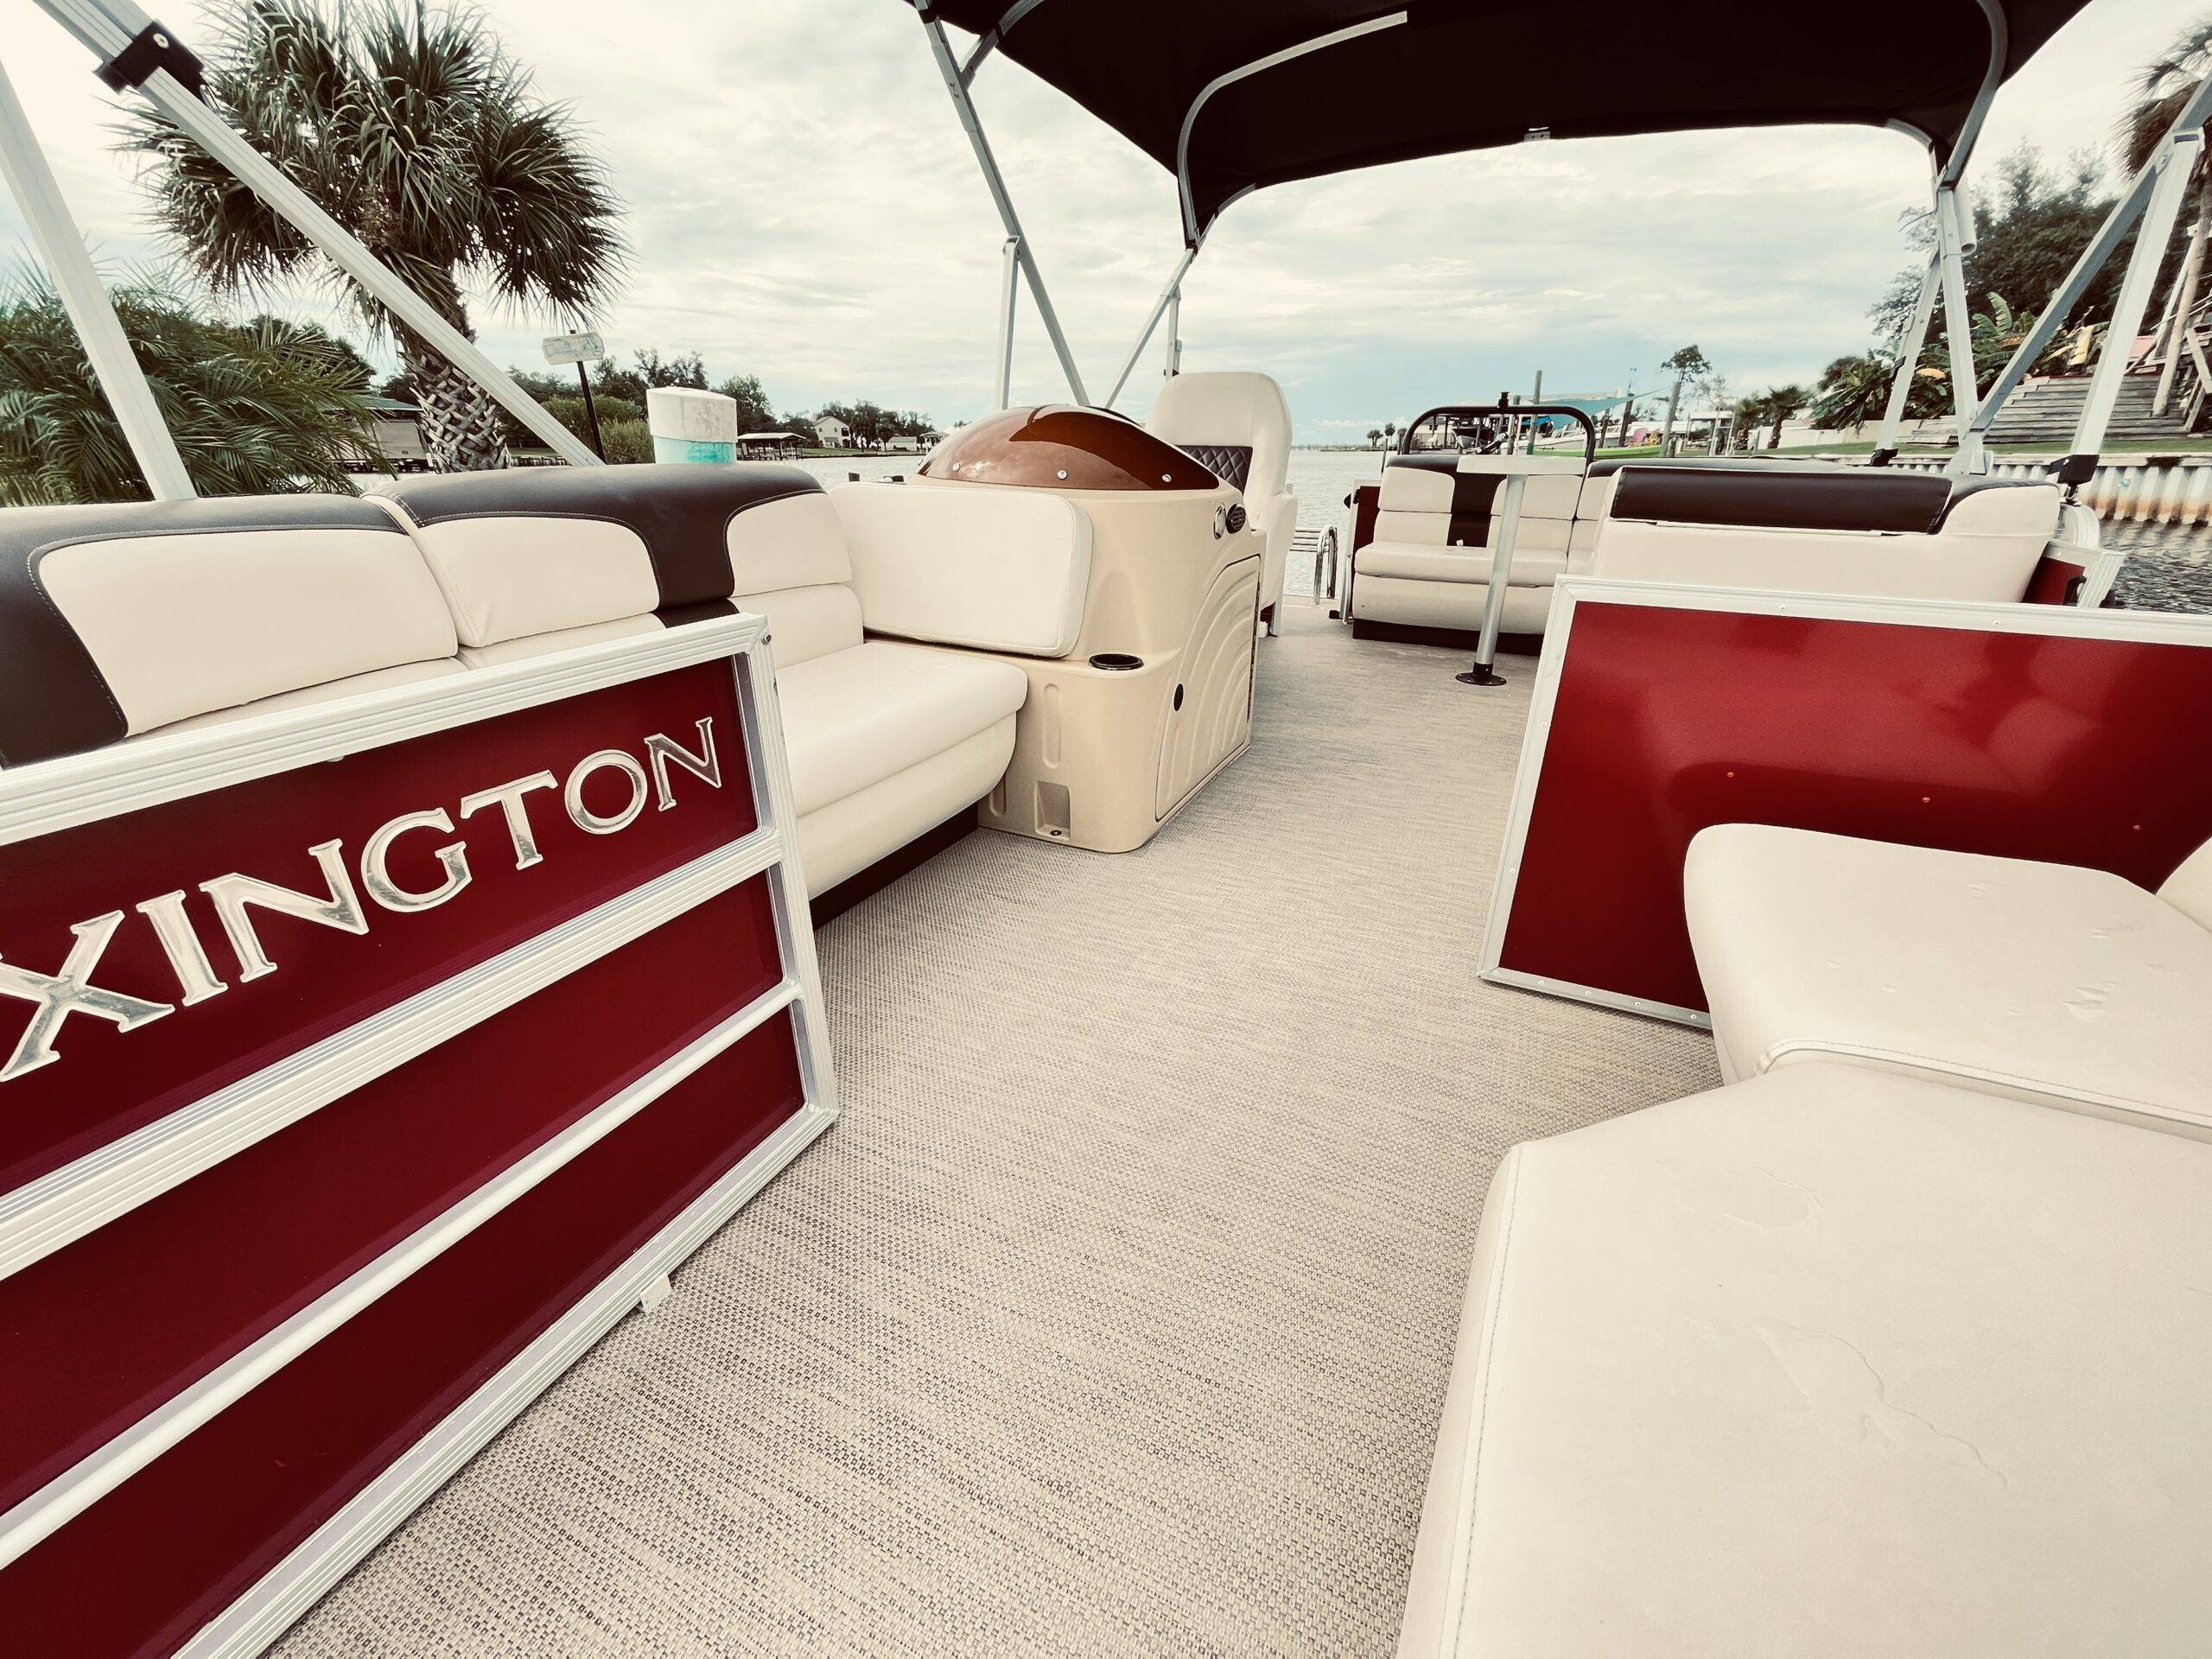 Interior view of a spacious pontoon boat with comfortable seating and open space, inviting you to be your own captain and enjoy the ride.